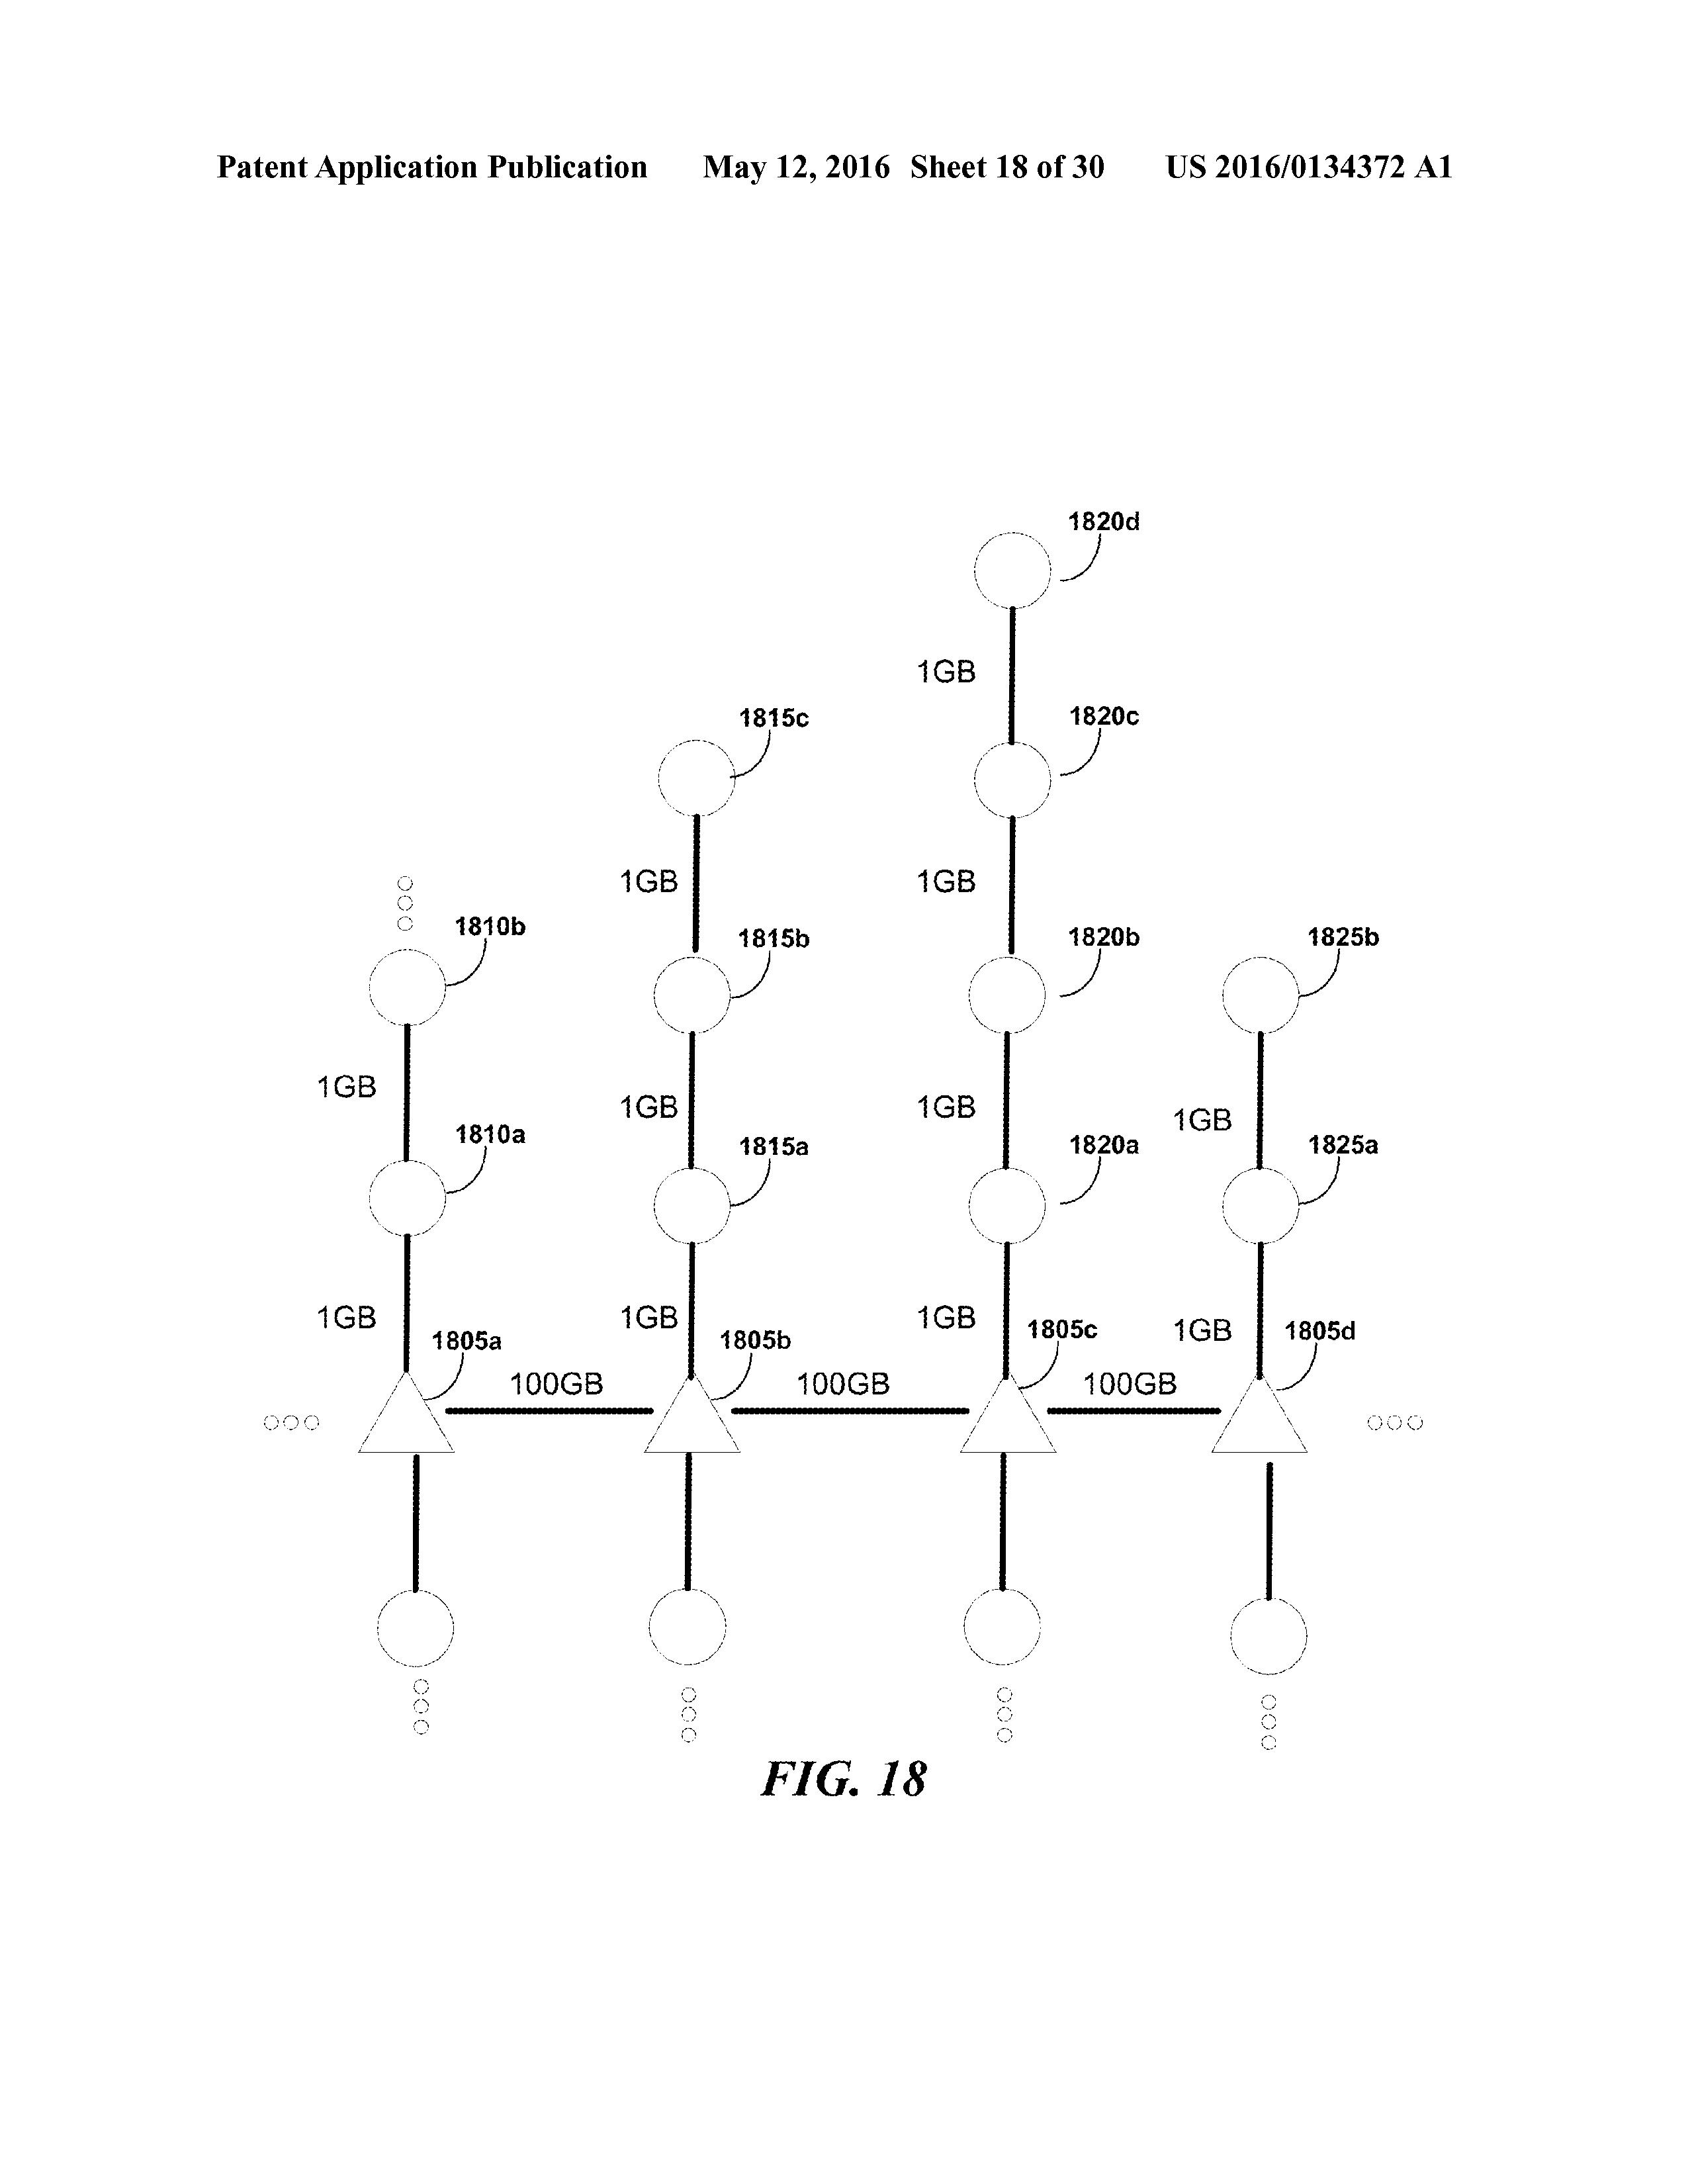 US20160134372A1 DEPLOYING LINE-OF-SIGHT COMMUNICATIONS NETWORKS